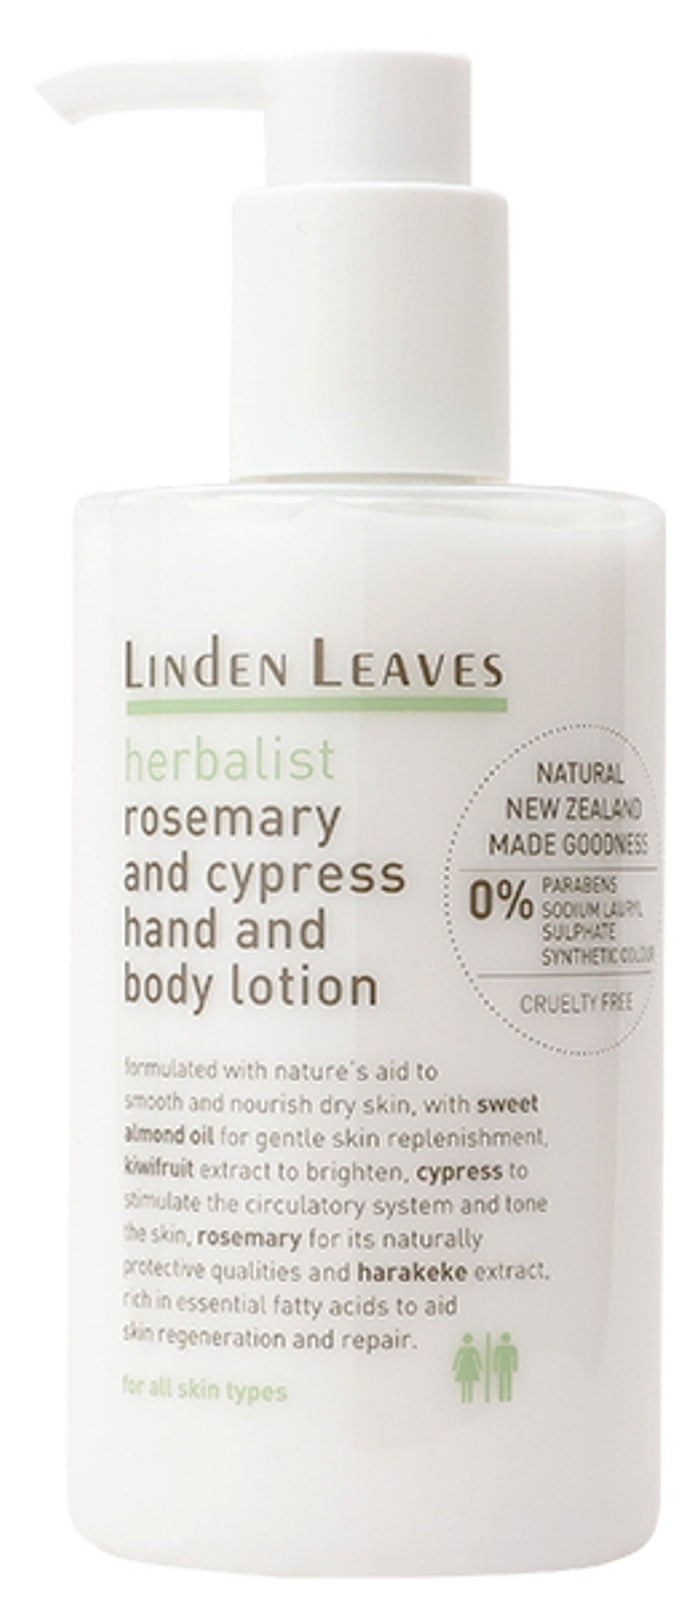 Linden Leaves: Rosemary & Cypress Lotion (300ml)